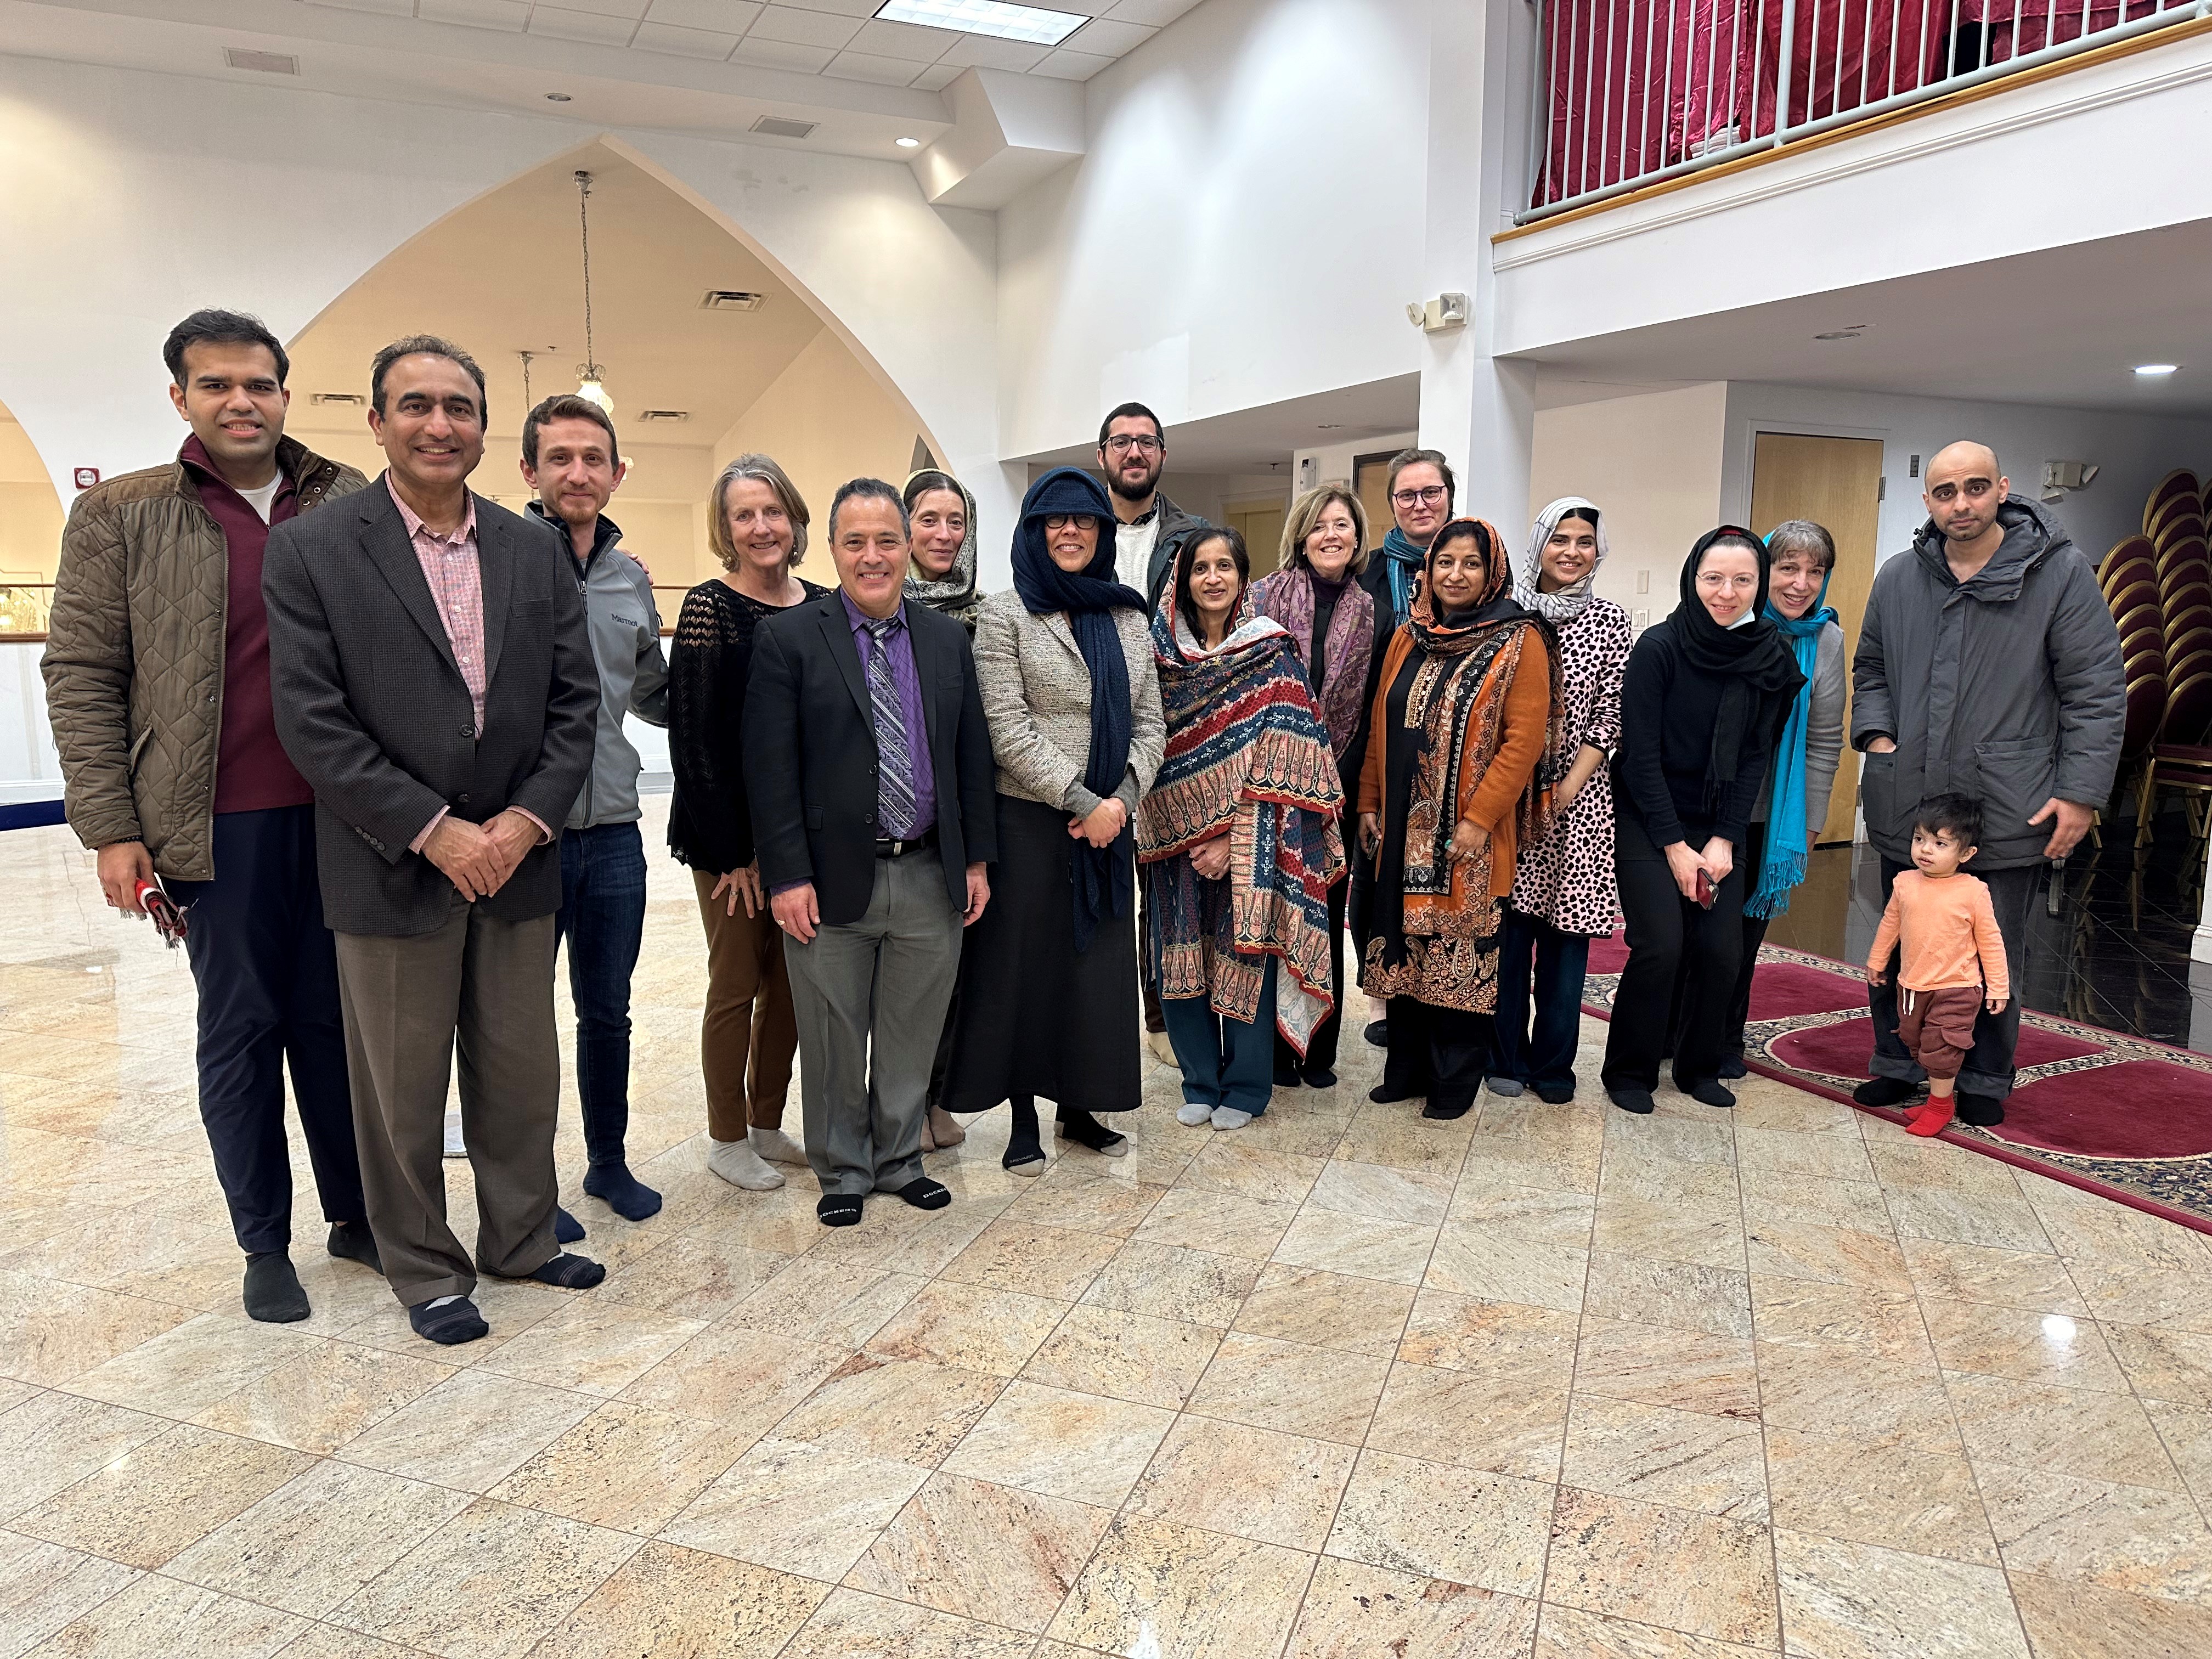 Interfaith Gathering participants from UMass